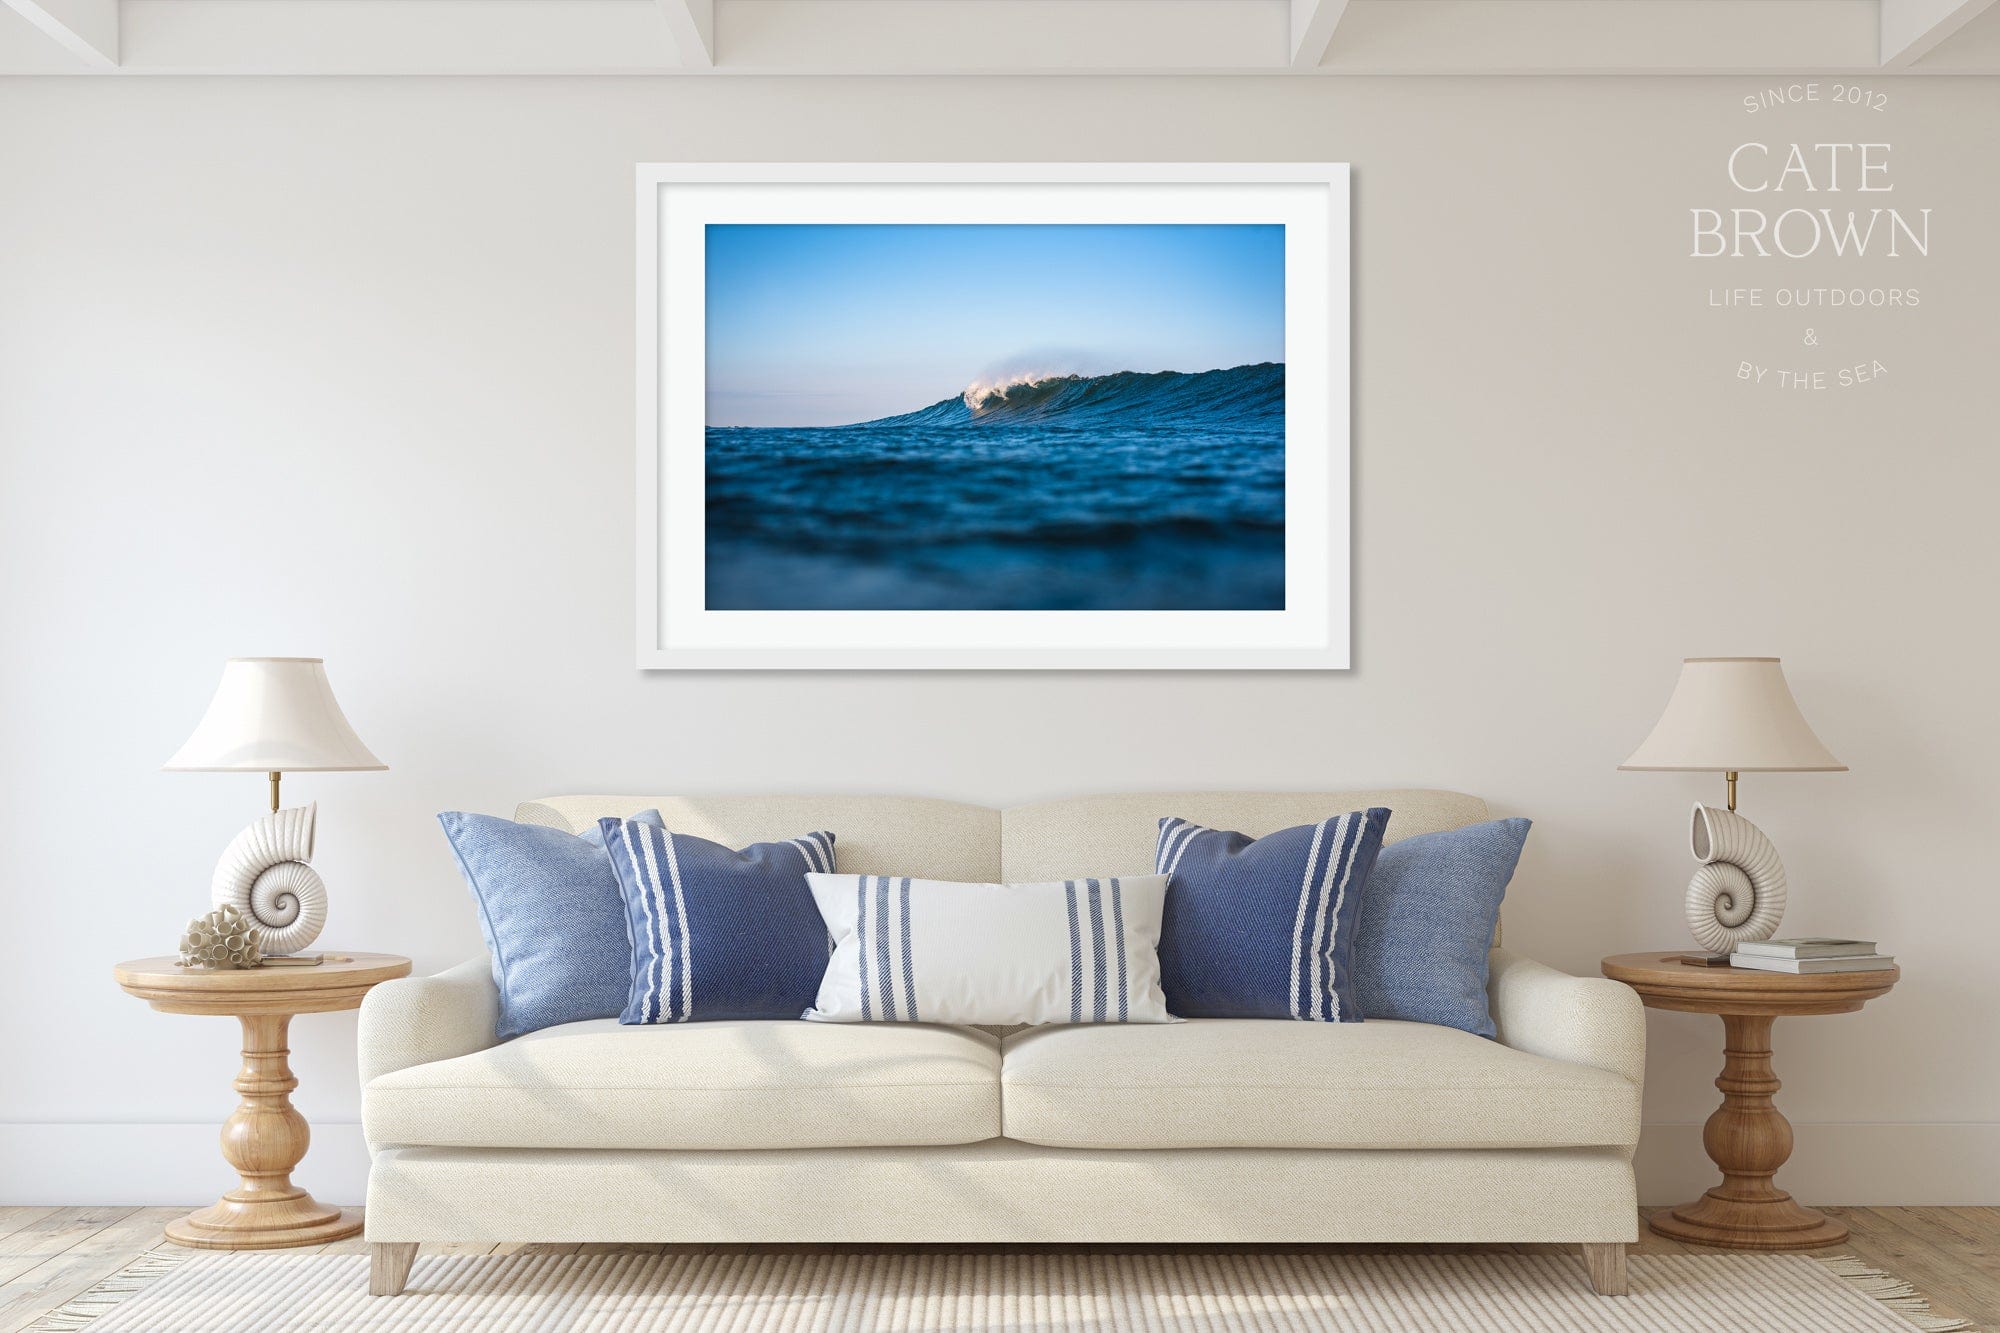 Cate Brown Photo Fine Art Print / 8"x12" / None (Print Only) Trestles Left  //  Ocean Photography Made to Order Ocean Fine Art